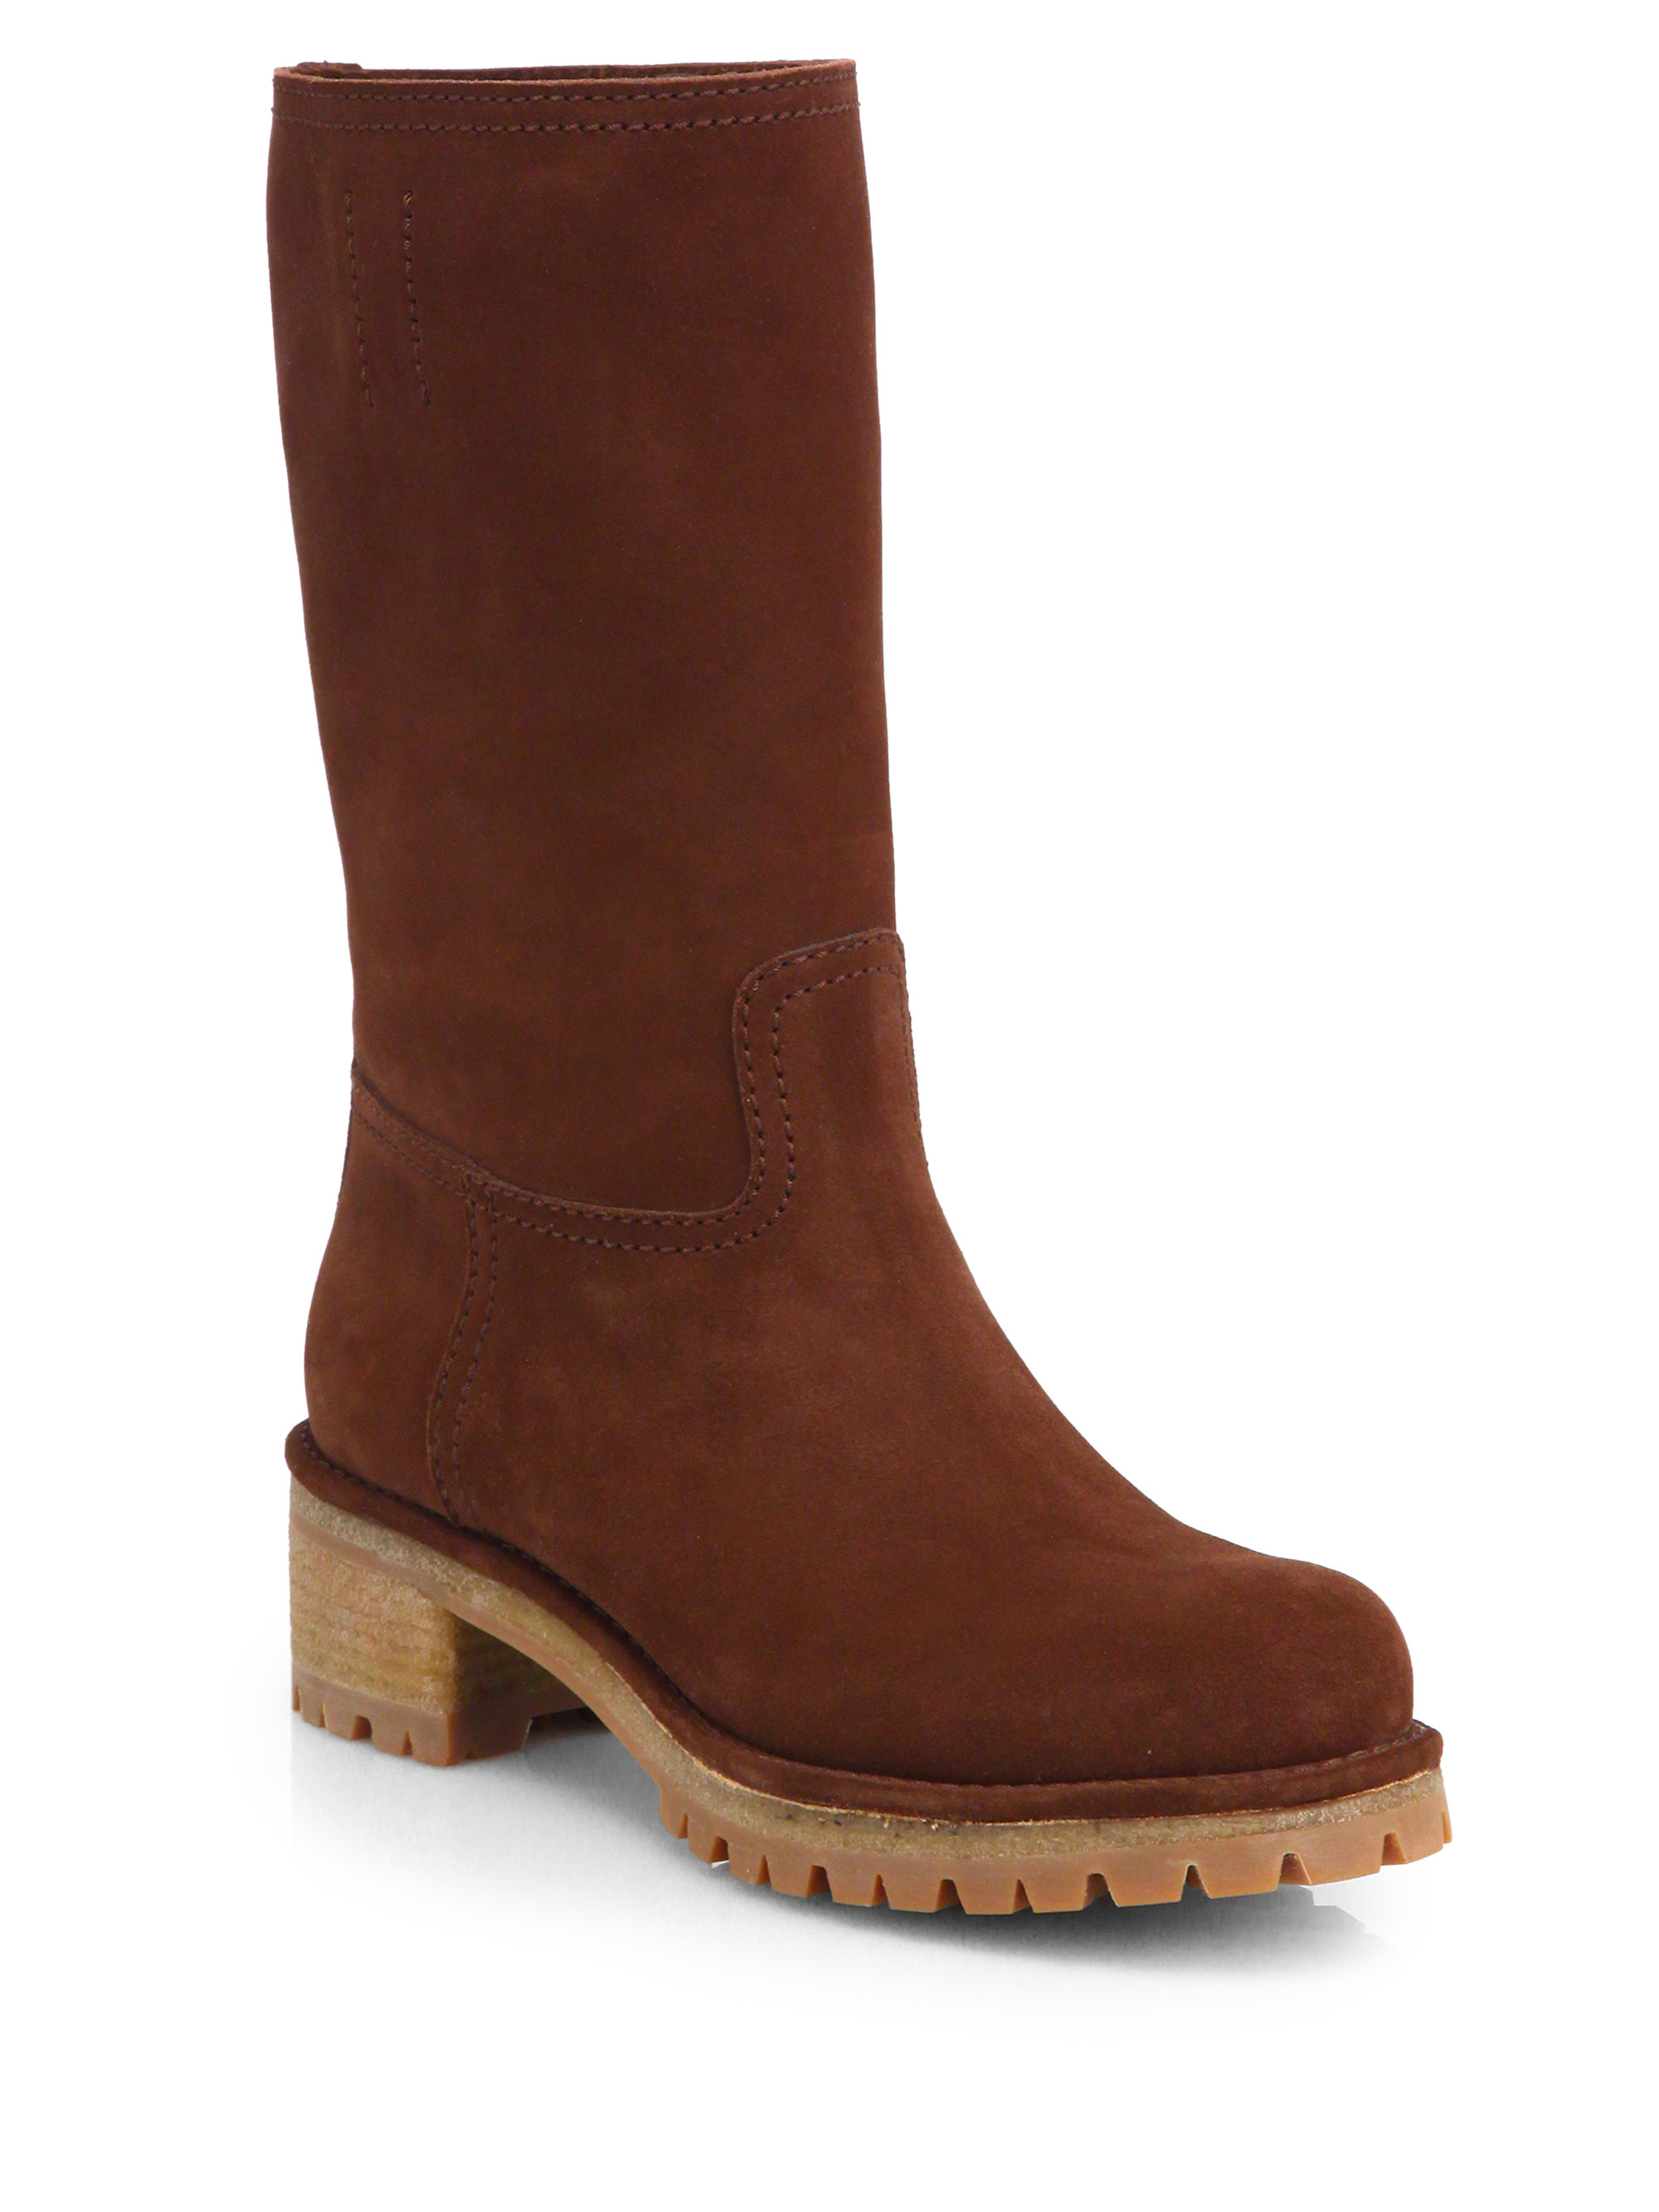 Prada Suede Mid-Calf Boots in Brown | Lyst